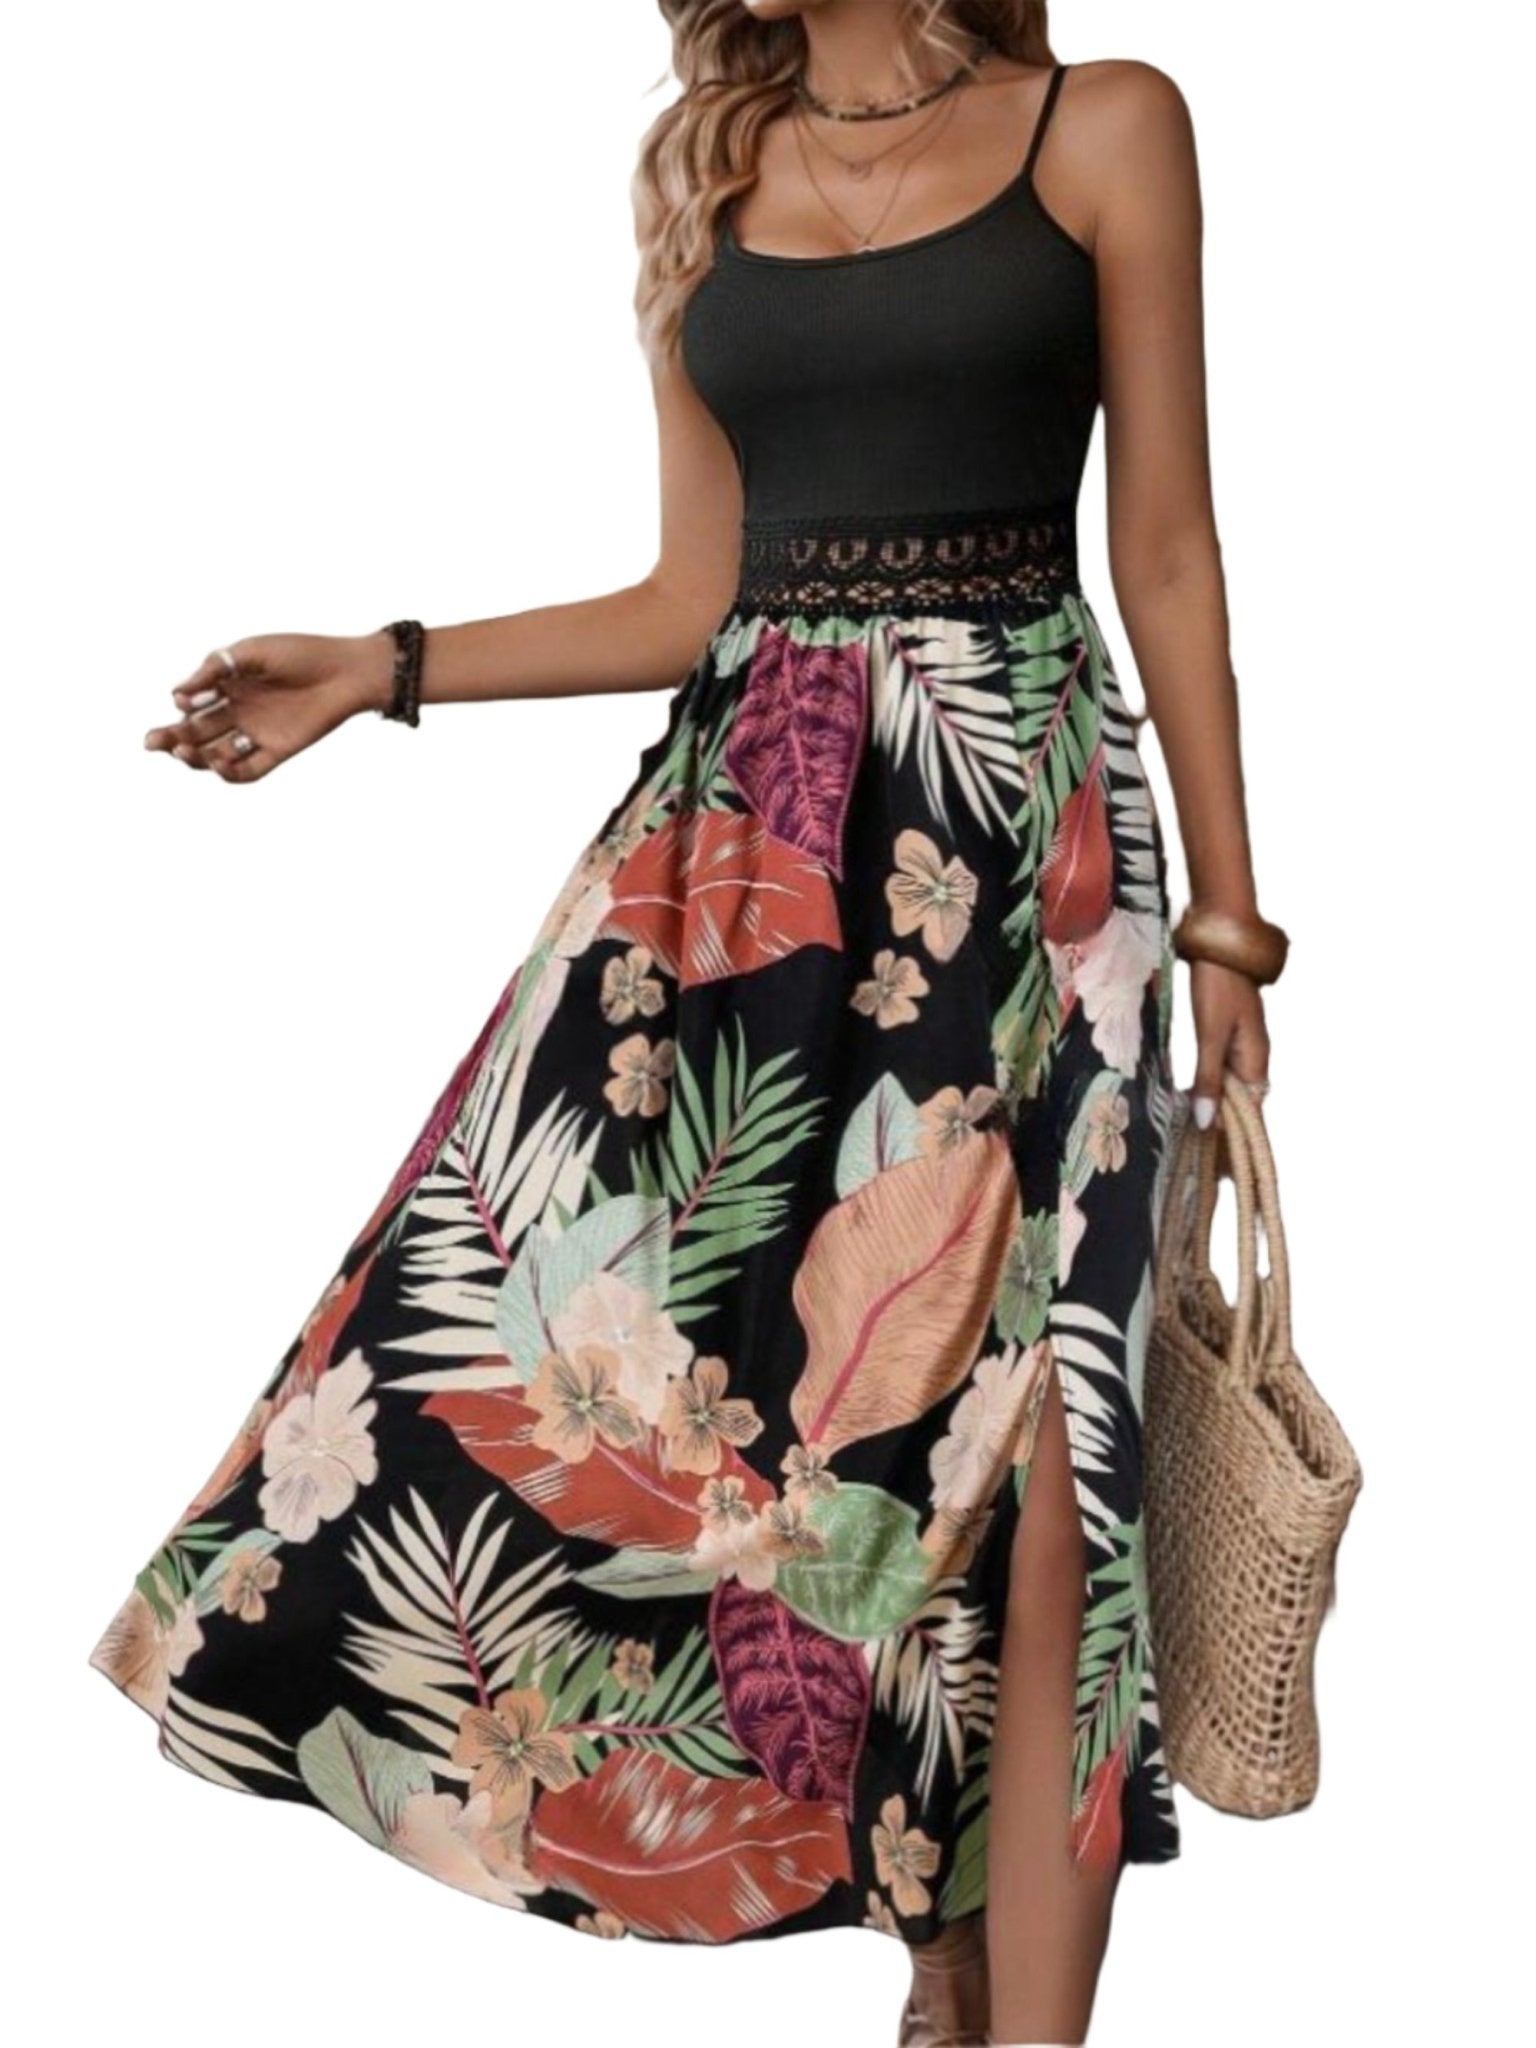 The image is showcasing a Slit Printed Scoop Neck Cami Dress Casual Summer Maxi Dress For women at Mommy & Lino's Closet